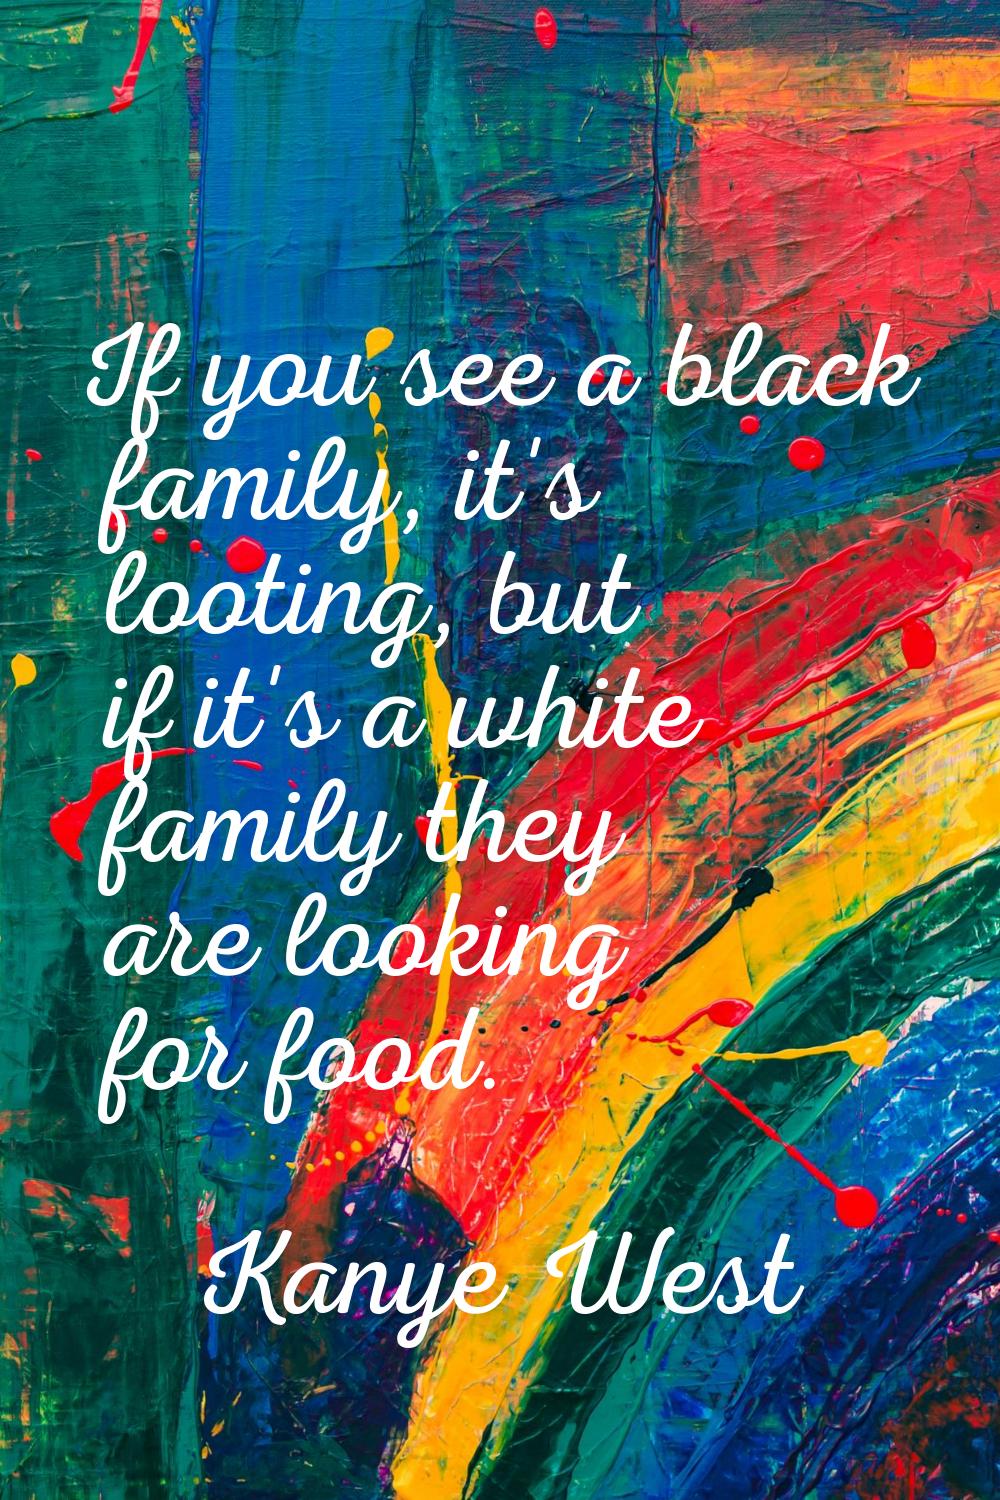 If you see a black family, it's looting, but if it's a white family they are looking for food.